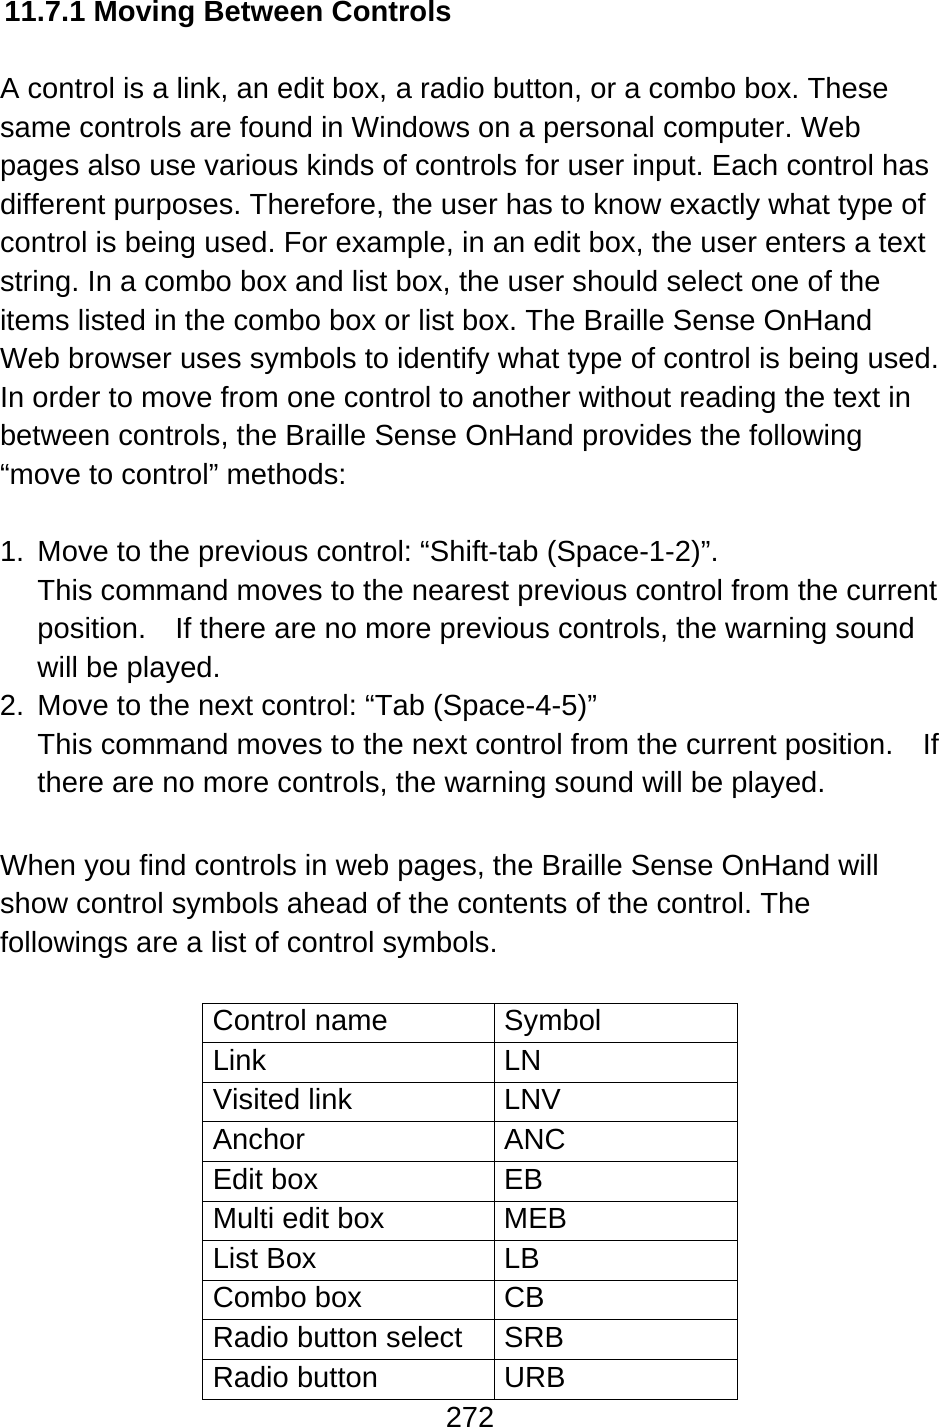 272  11.7.1 Moving Between Controls  A control is a link, an edit box, a radio button, or a combo box. These same controls are found in Windows on a personal computer. Web pages also use various kinds of controls for user input. Each control has different purposes. Therefore, the user has to know exactly what type of control is being used. For example, in an edit box, the user enters a text string. In a combo box and list box, the user should select one of the items listed in the combo box or list box. The Braille Sense OnHand Web browser uses symbols to identify what type of control is being used.   In order to move from one control to another without reading the text in between controls, the Braille Sense OnHand provides the following “move to control” methods:  1.  Move to the previous control: “Shift-tab (Space-1-2)”.   This command moves to the nearest previous control from the current position.    If there are no more previous controls, the warning sound will be played. 2.  Move to the next control: “Tab (Space-4-5)” This command moves to the next control from the current position.  If there are no more controls, the warning sound will be played.  When you find controls in web pages, the Braille Sense OnHand will show control symbols ahead of the contents of the control. The followings are a list of control symbols.  Control name  Symbol Link LN Visited link  LNV Anchor ANC Edit box  EB Multi edit box  MEB List Box  LB Combo box  CB Radio button select  SRB Radio button  URB 